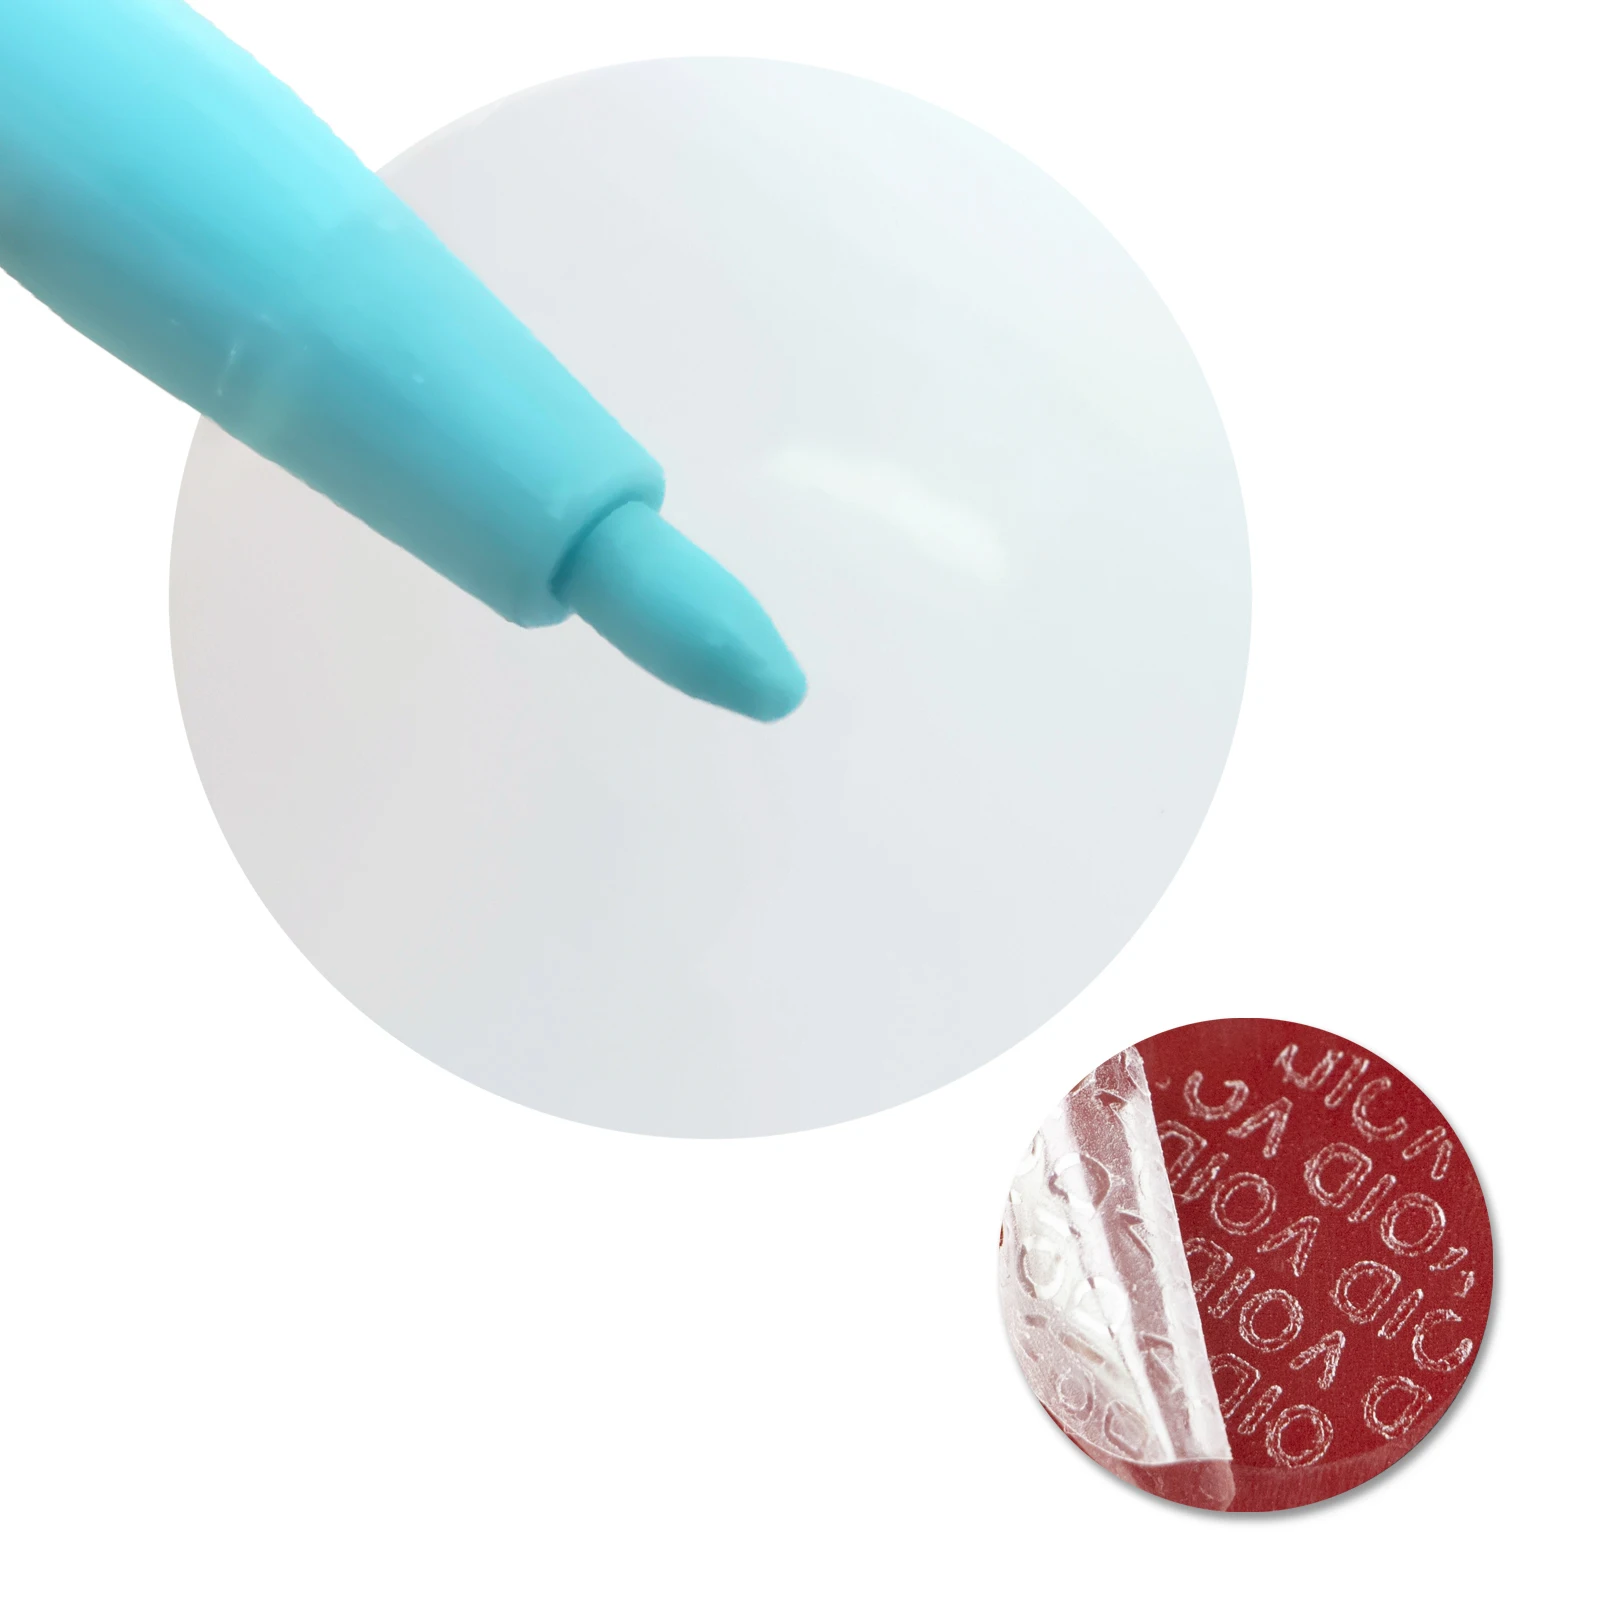 Clear Tamper Evident Stickers Package Seals transparent 1 inch Round warranty void Labels security Stickers for Envelope, Box